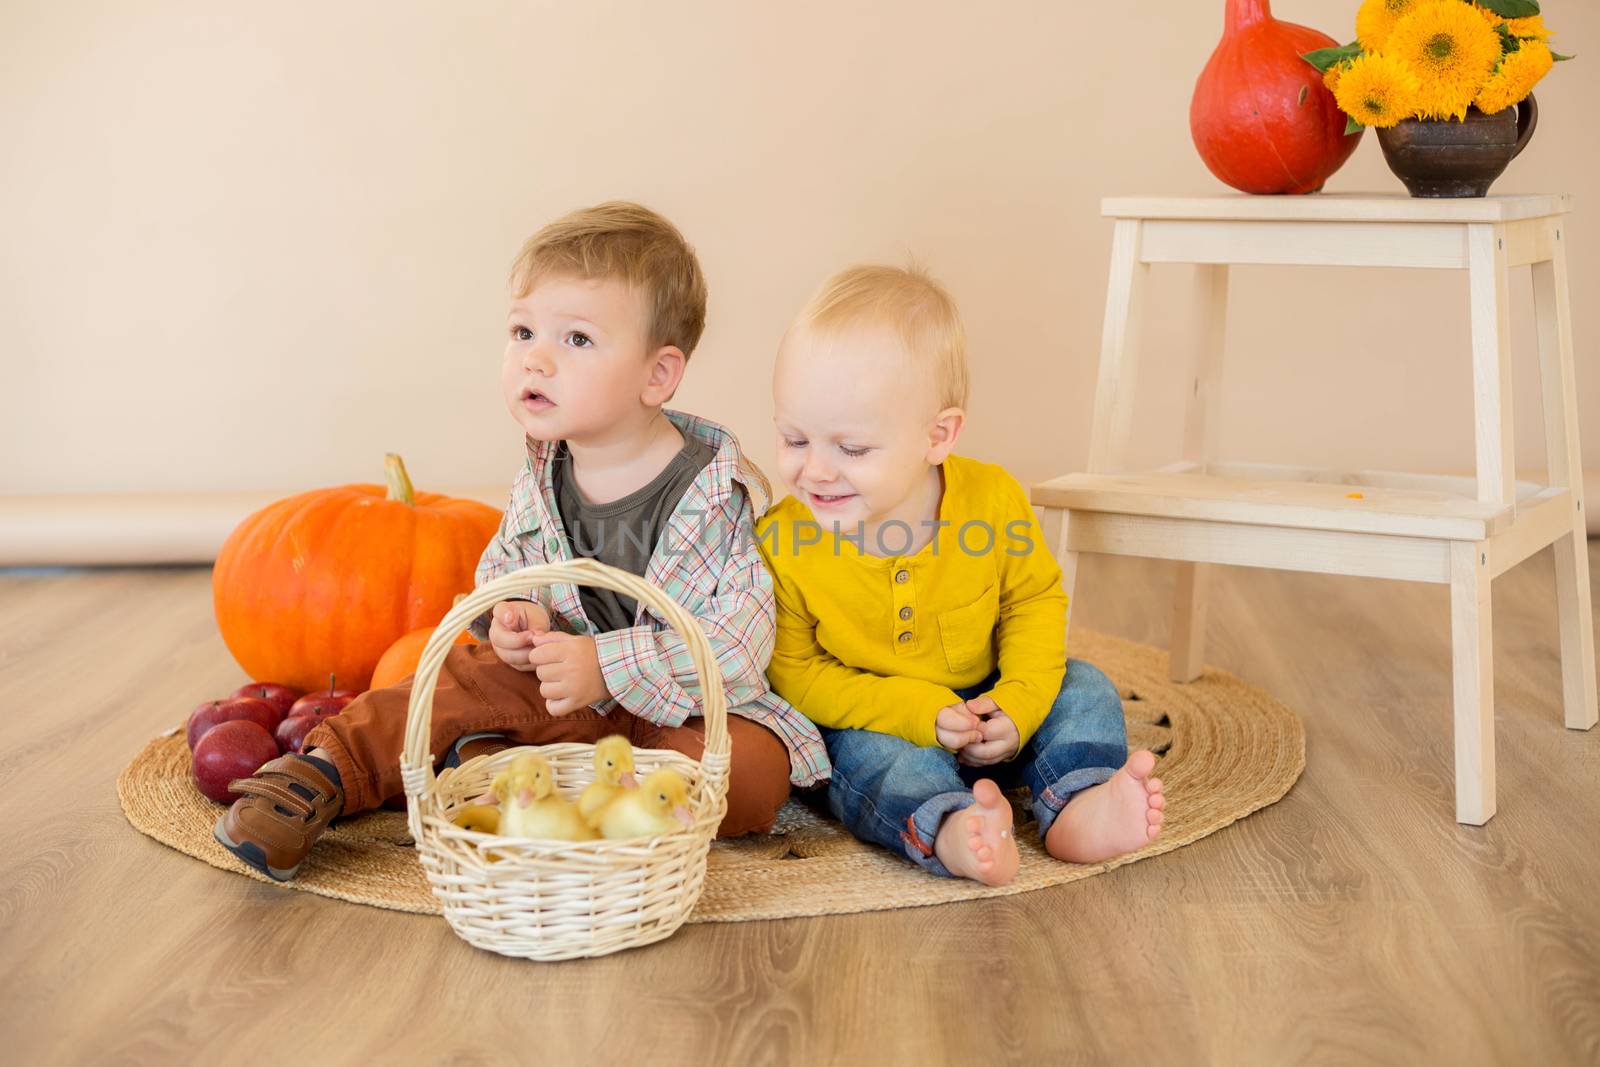 .Kids sit among pumpkins with a basket of ducklings